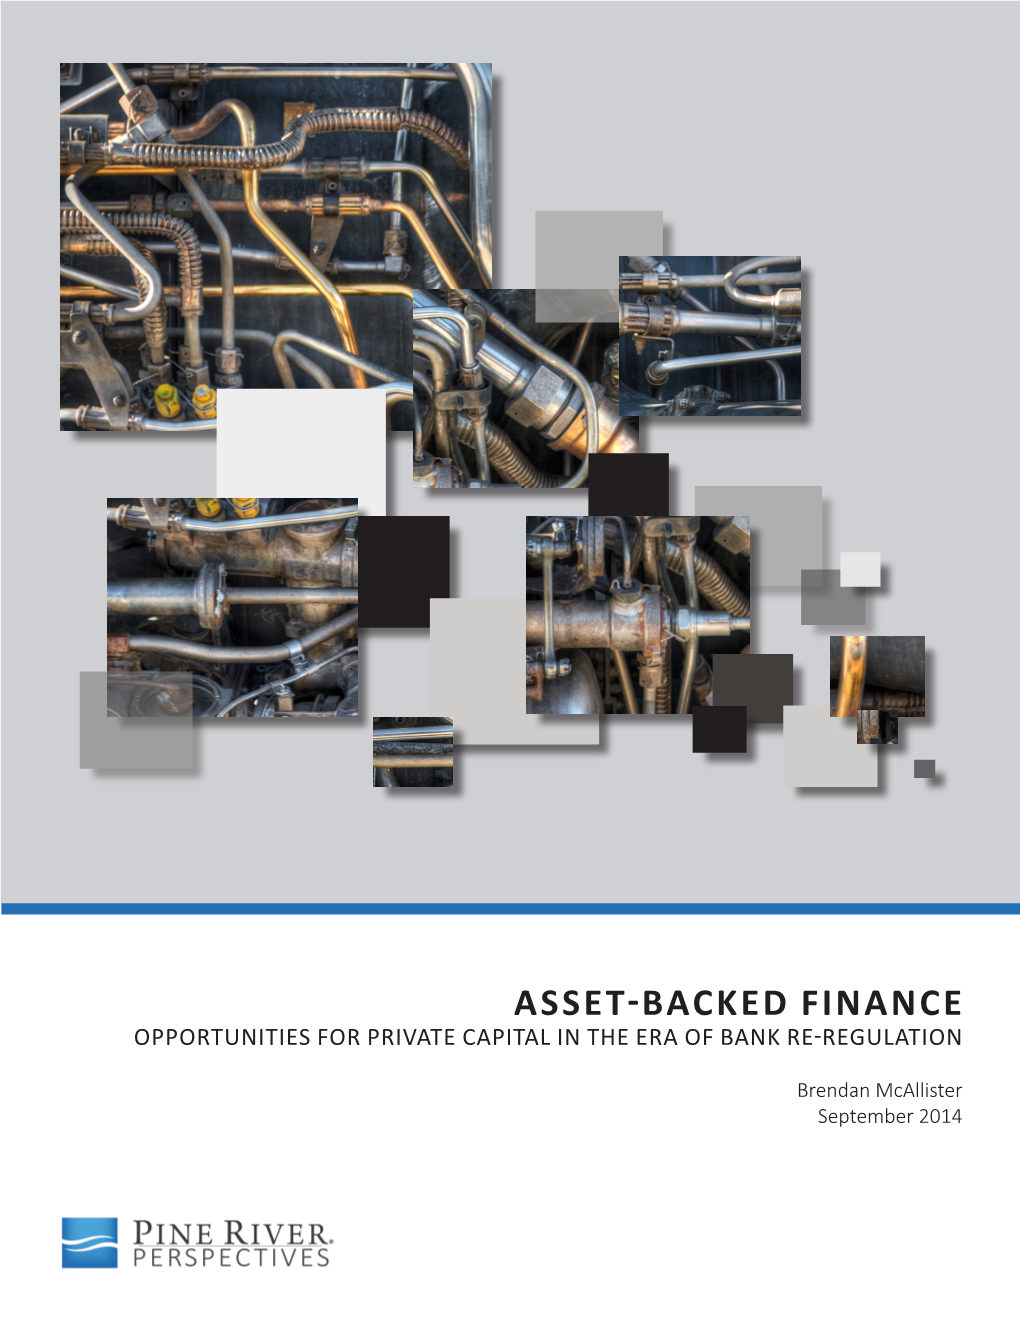 Asset-Backed Finance Opportunities for Private Capital in the Era of Bank Re-Regulation